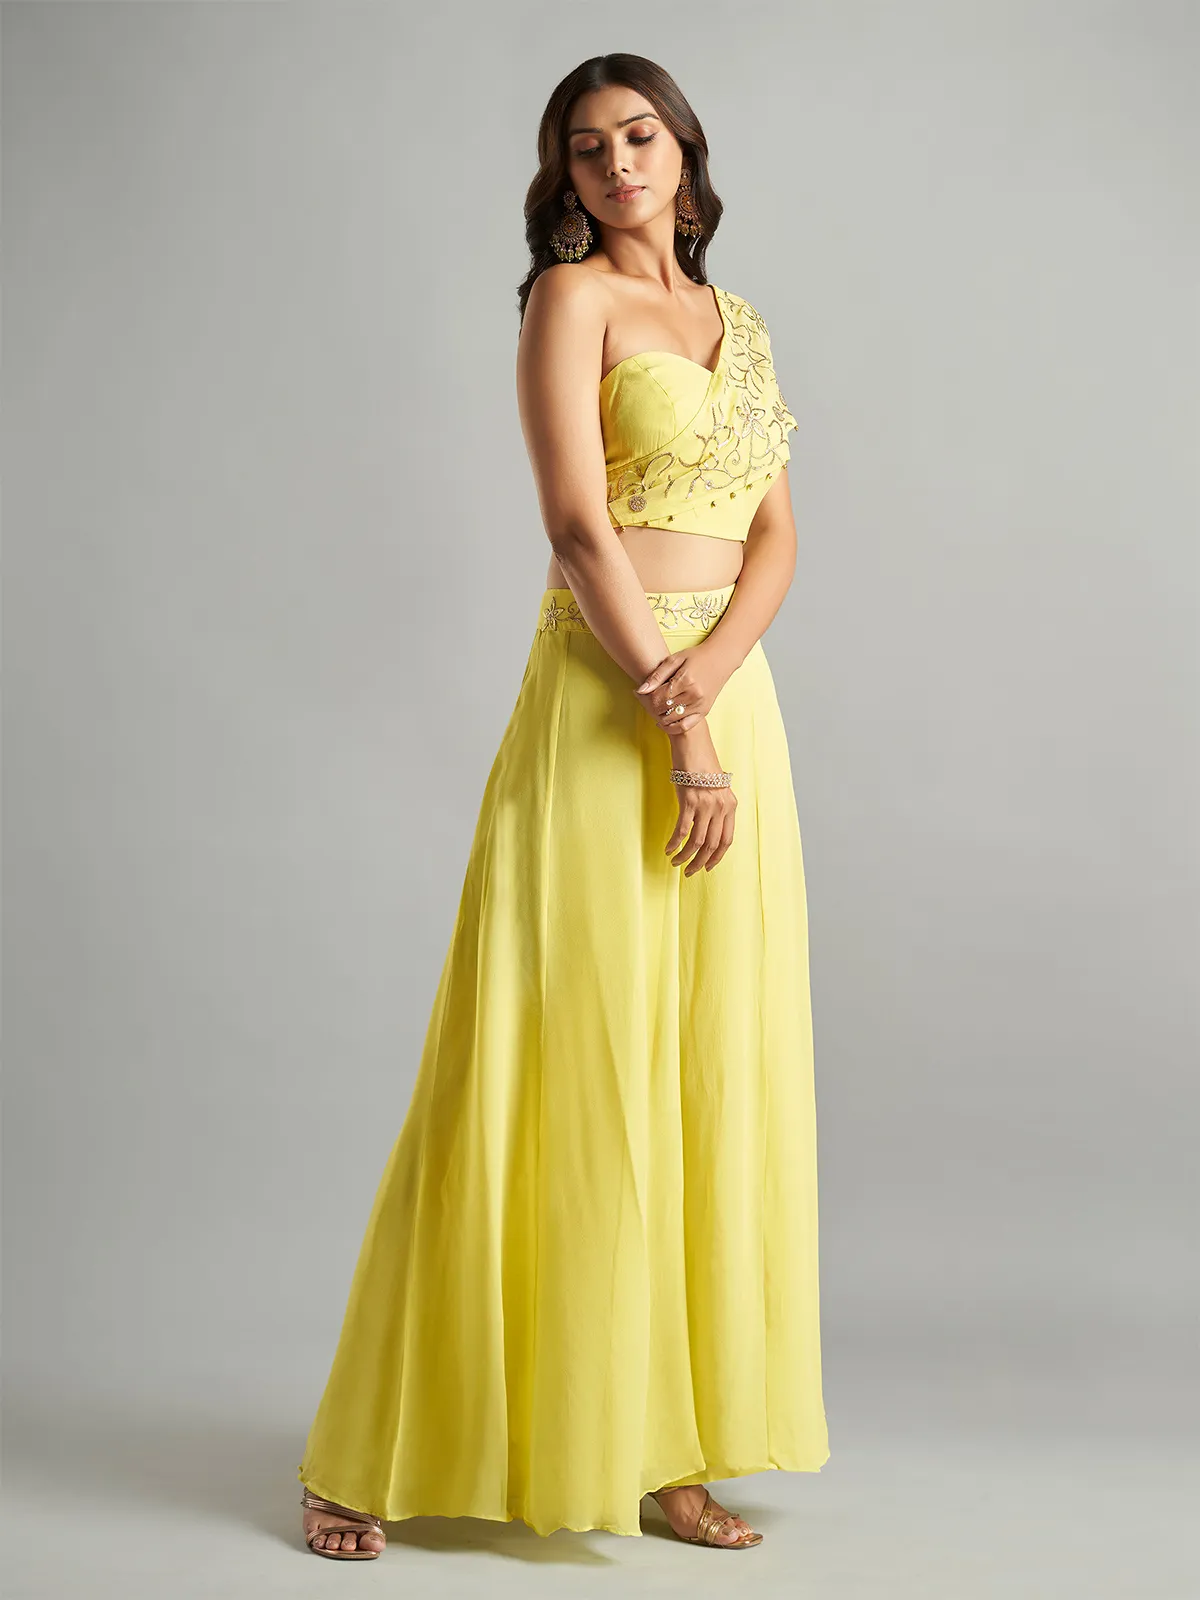 Delightful yellow georgette palazzo suit